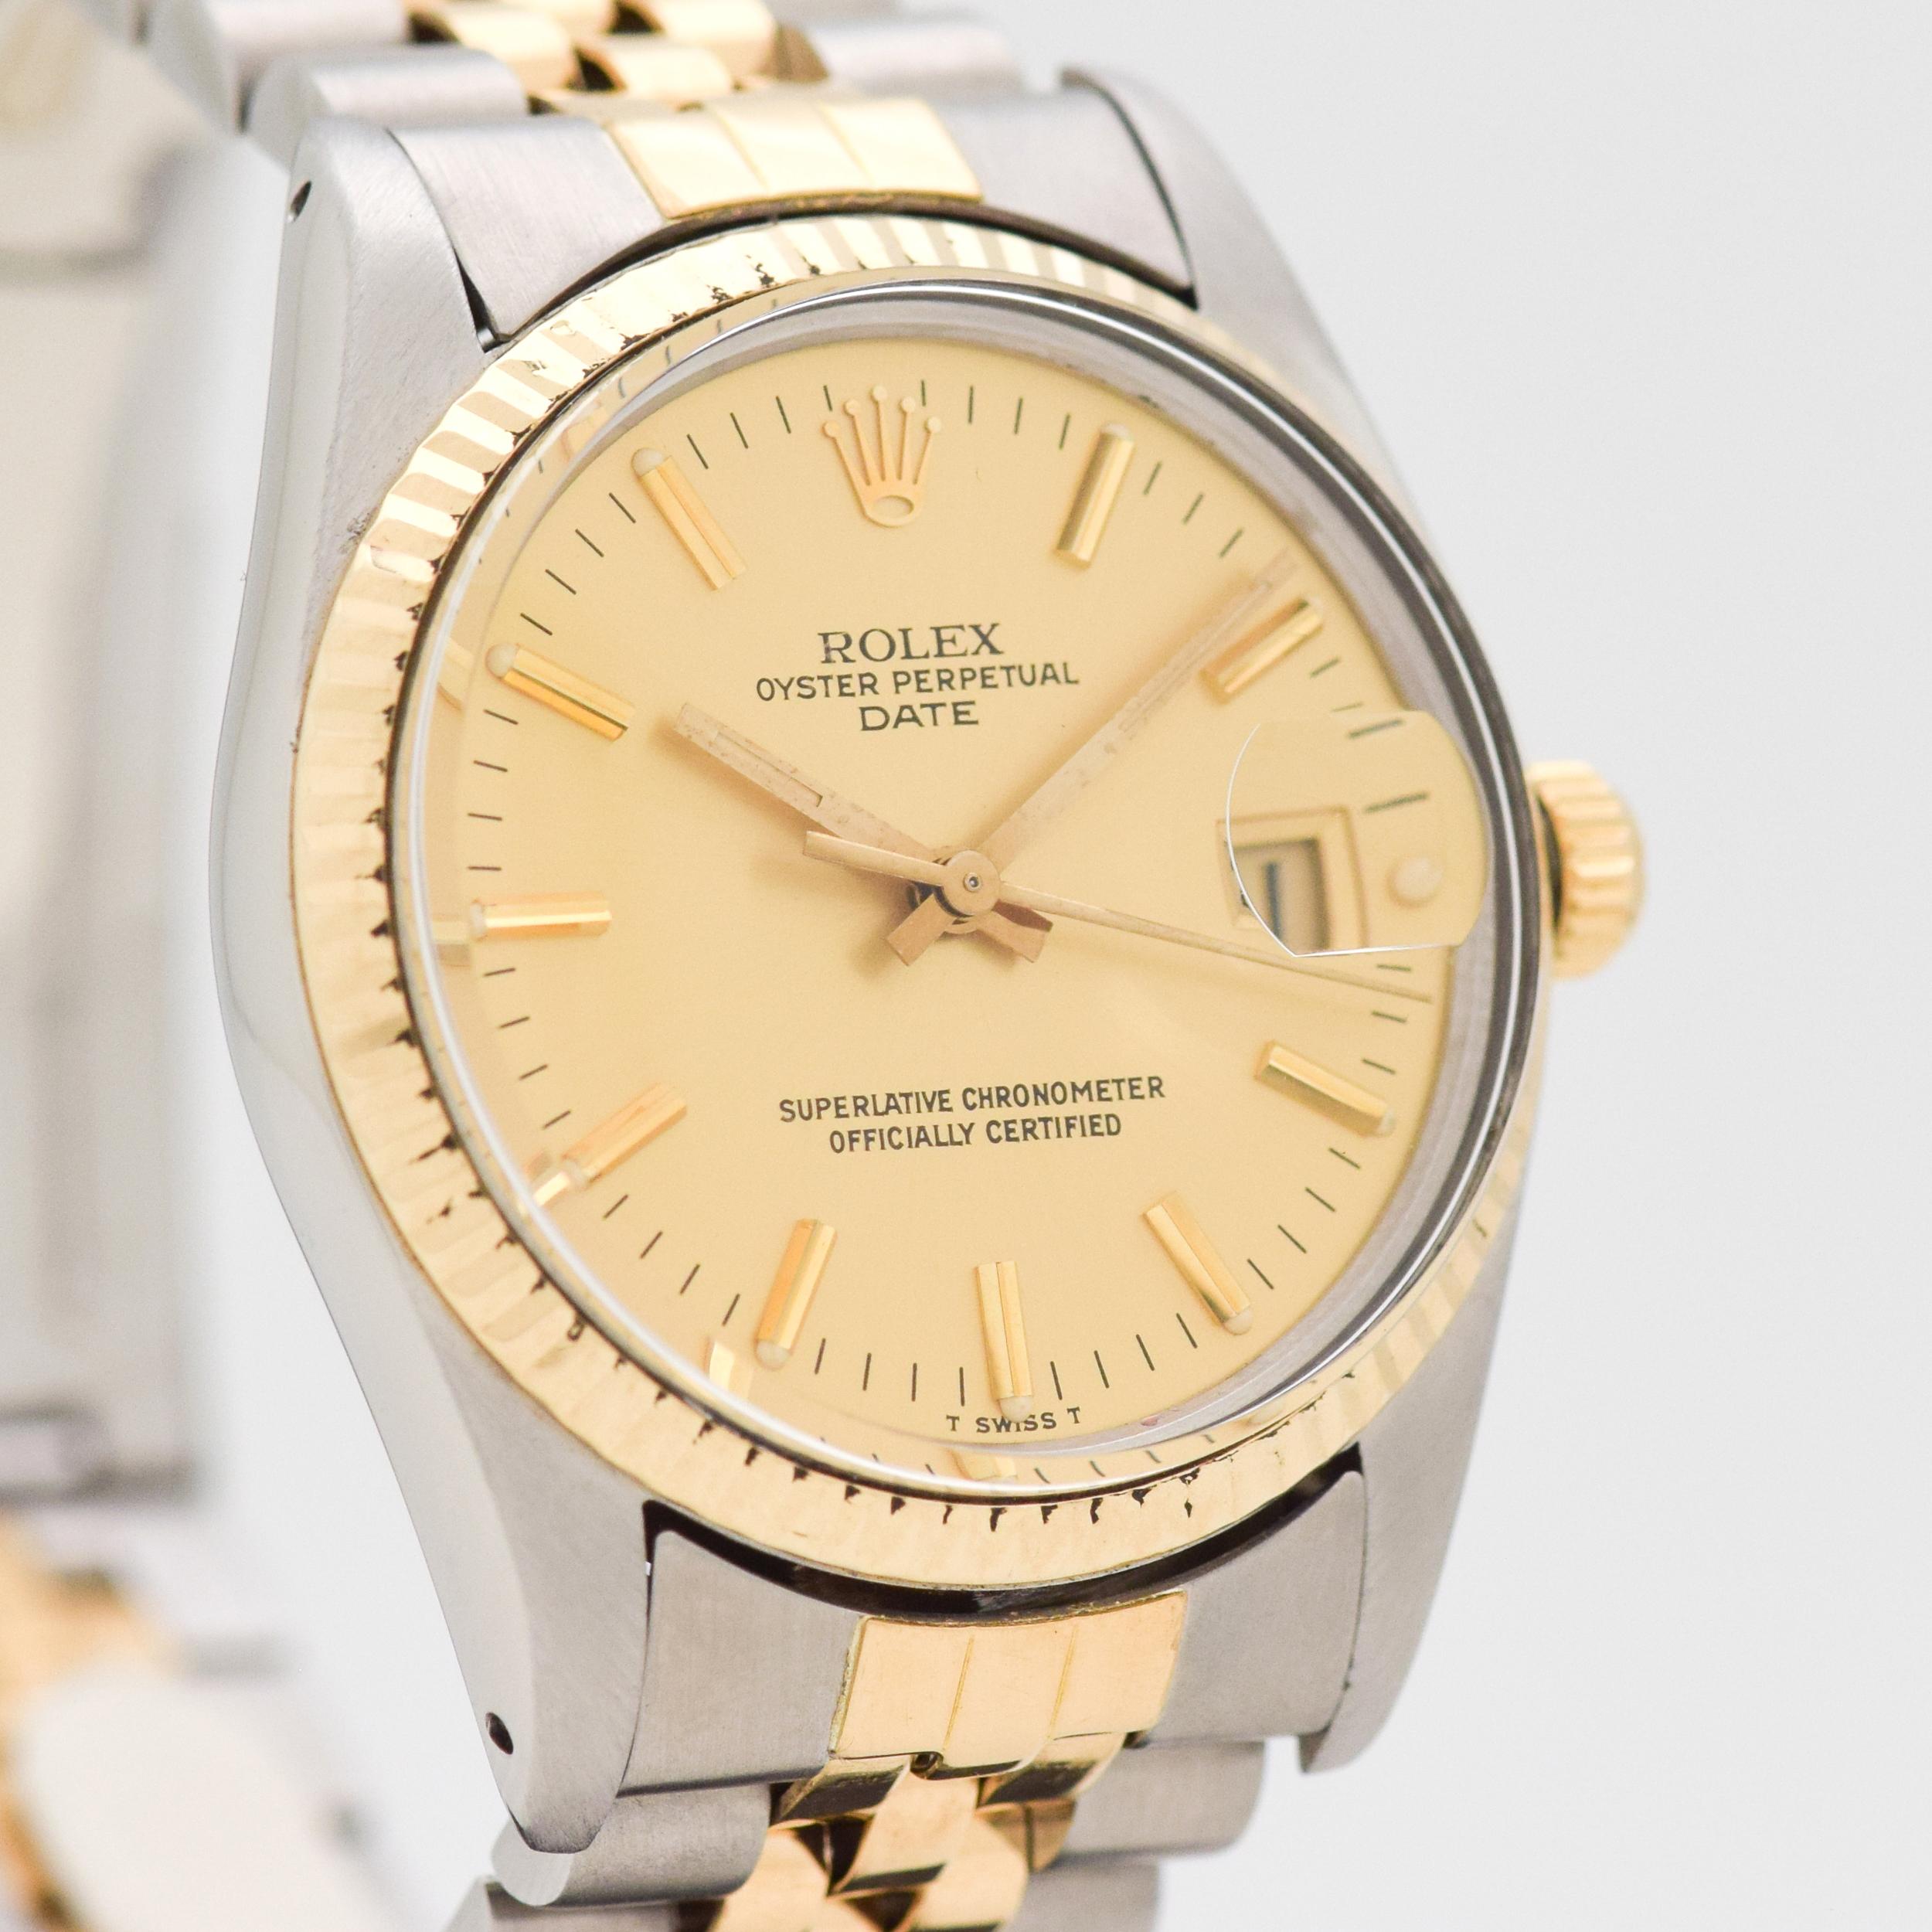 1981 Vintage Rolex Date Automatic Reference 15000. 18K Yellow Gold & Stainless Steel case. Fluted bezel. Quick-set function. Great looking, champagne dial. Powered by a 27-jewel, automatic caliber movement. Equipped with an 18K Yellow Gold &